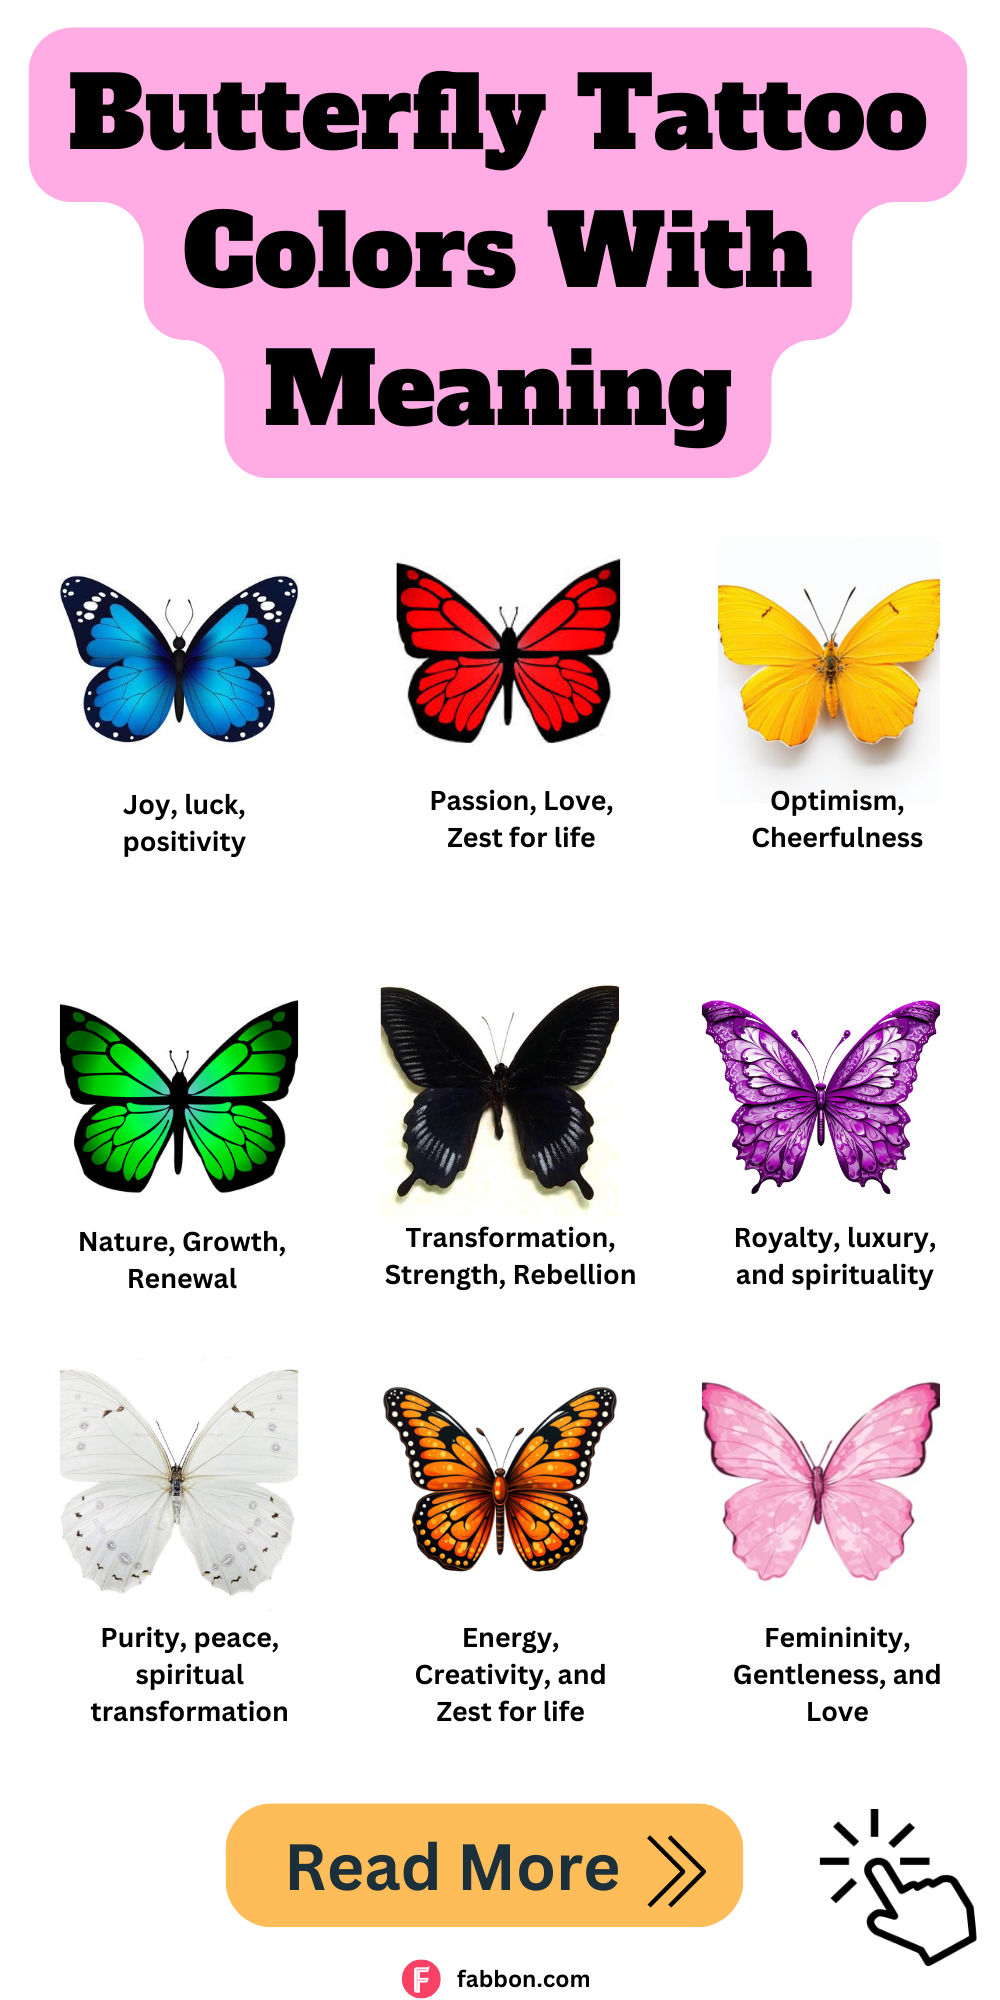 butterfly-tattoo-colors-and-meaning